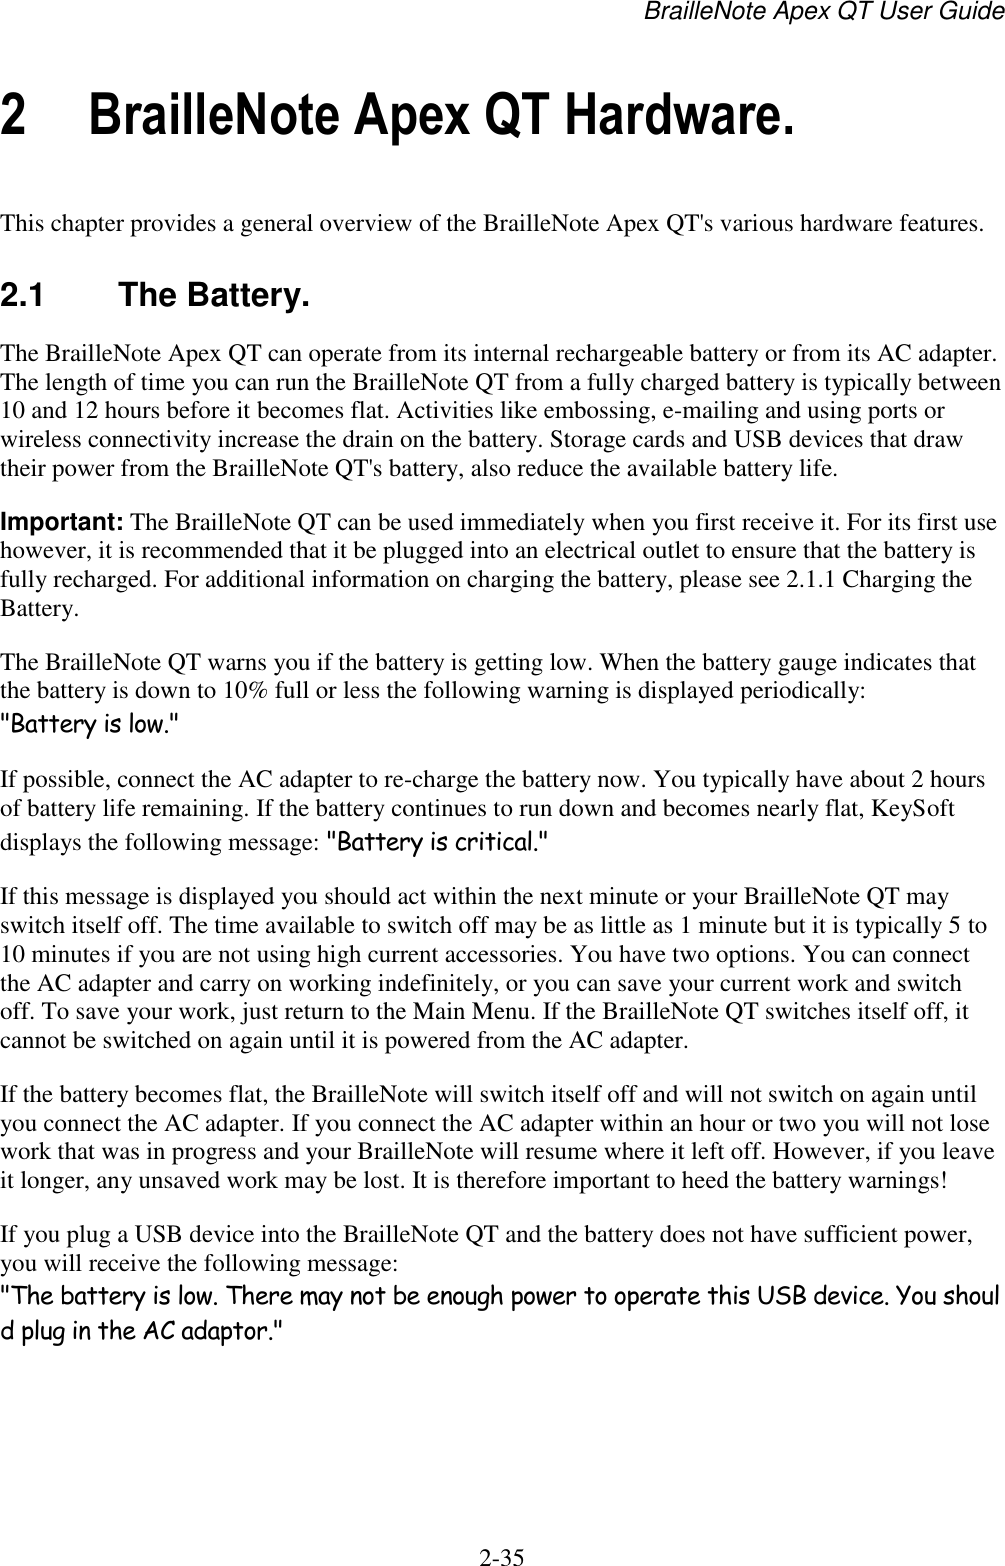 BrailleNote Apex QT User Guide  2-35   2 BrailleNote Apex QT Hardware. This chapter provides a general overview of the BrailleNote Apex QT&apos;s various hardware features.  2.1  The Battery. The BrailleNote Apex QT can operate from its internal rechargeable battery or from its AC adapter. The length of time you can run the BrailleNote QT from a fully charged battery is typically between 10 and 12 hours before it becomes flat. Activities like embossing, e-mailing and using ports or wireless connectivity increase the drain on the battery. Storage cards and USB devices that draw their power from the BrailleNote QT&apos;s battery, also reduce the available battery life. Important: The BrailleNote QT can be used immediately when you first receive it. For its first use however, it is recommended that it be plugged into an electrical outlet to ensure that the battery is fully recharged. For additional information on charging the battery, please see 2.1.1 Charging the Battery.  The BrailleNote QT warns you if the battery is getting low. When the battery gauge indicates that the battery is down to 10% full or less the following warning is displayed periodically: &quot;Battery is low.&quot; If possible, connect the AC adapter to re-charge the battery now. You typically have about 2 hours of battery life remaining. If the battery continues to run down and becomes nearly flat, KeySoft displays the following message: &quot;Battery is critical.&quot; If this message is displayed you should act within the next minute or your BrailleNote QT may switch itself off. The time available to switch off may be as little as 1 minute but it is typically 5 to 10 minutes if you are not using high current accessories. You have two options. You can connect the AC adapter and carry on working indefinitely, or you can save your current work and switch off. To save your work, just return to the Main Menu. If the BrailleNote QT switches itself off, it cannot be switched on again until it is powered from the AC adapter. If the battery becomes flat, the BrailleNote will switch itself off and will not switch on again until you connect the AC adapter. If you connect the AC adapter within an hour or two you will not lose work that was in progress and your BrailleNote will resume where it left off. However, if you leave it longer, any unsaved work may be lost. It is therefore important to heed the battery warnings! If you plug a USB device into the BrailleNote QT and the battery does not have sufficient power, you will receive the following message: &quot;The battery is low. There may not be enough power to operate this USB device. You should plug in the AC adaptor.&quot; 